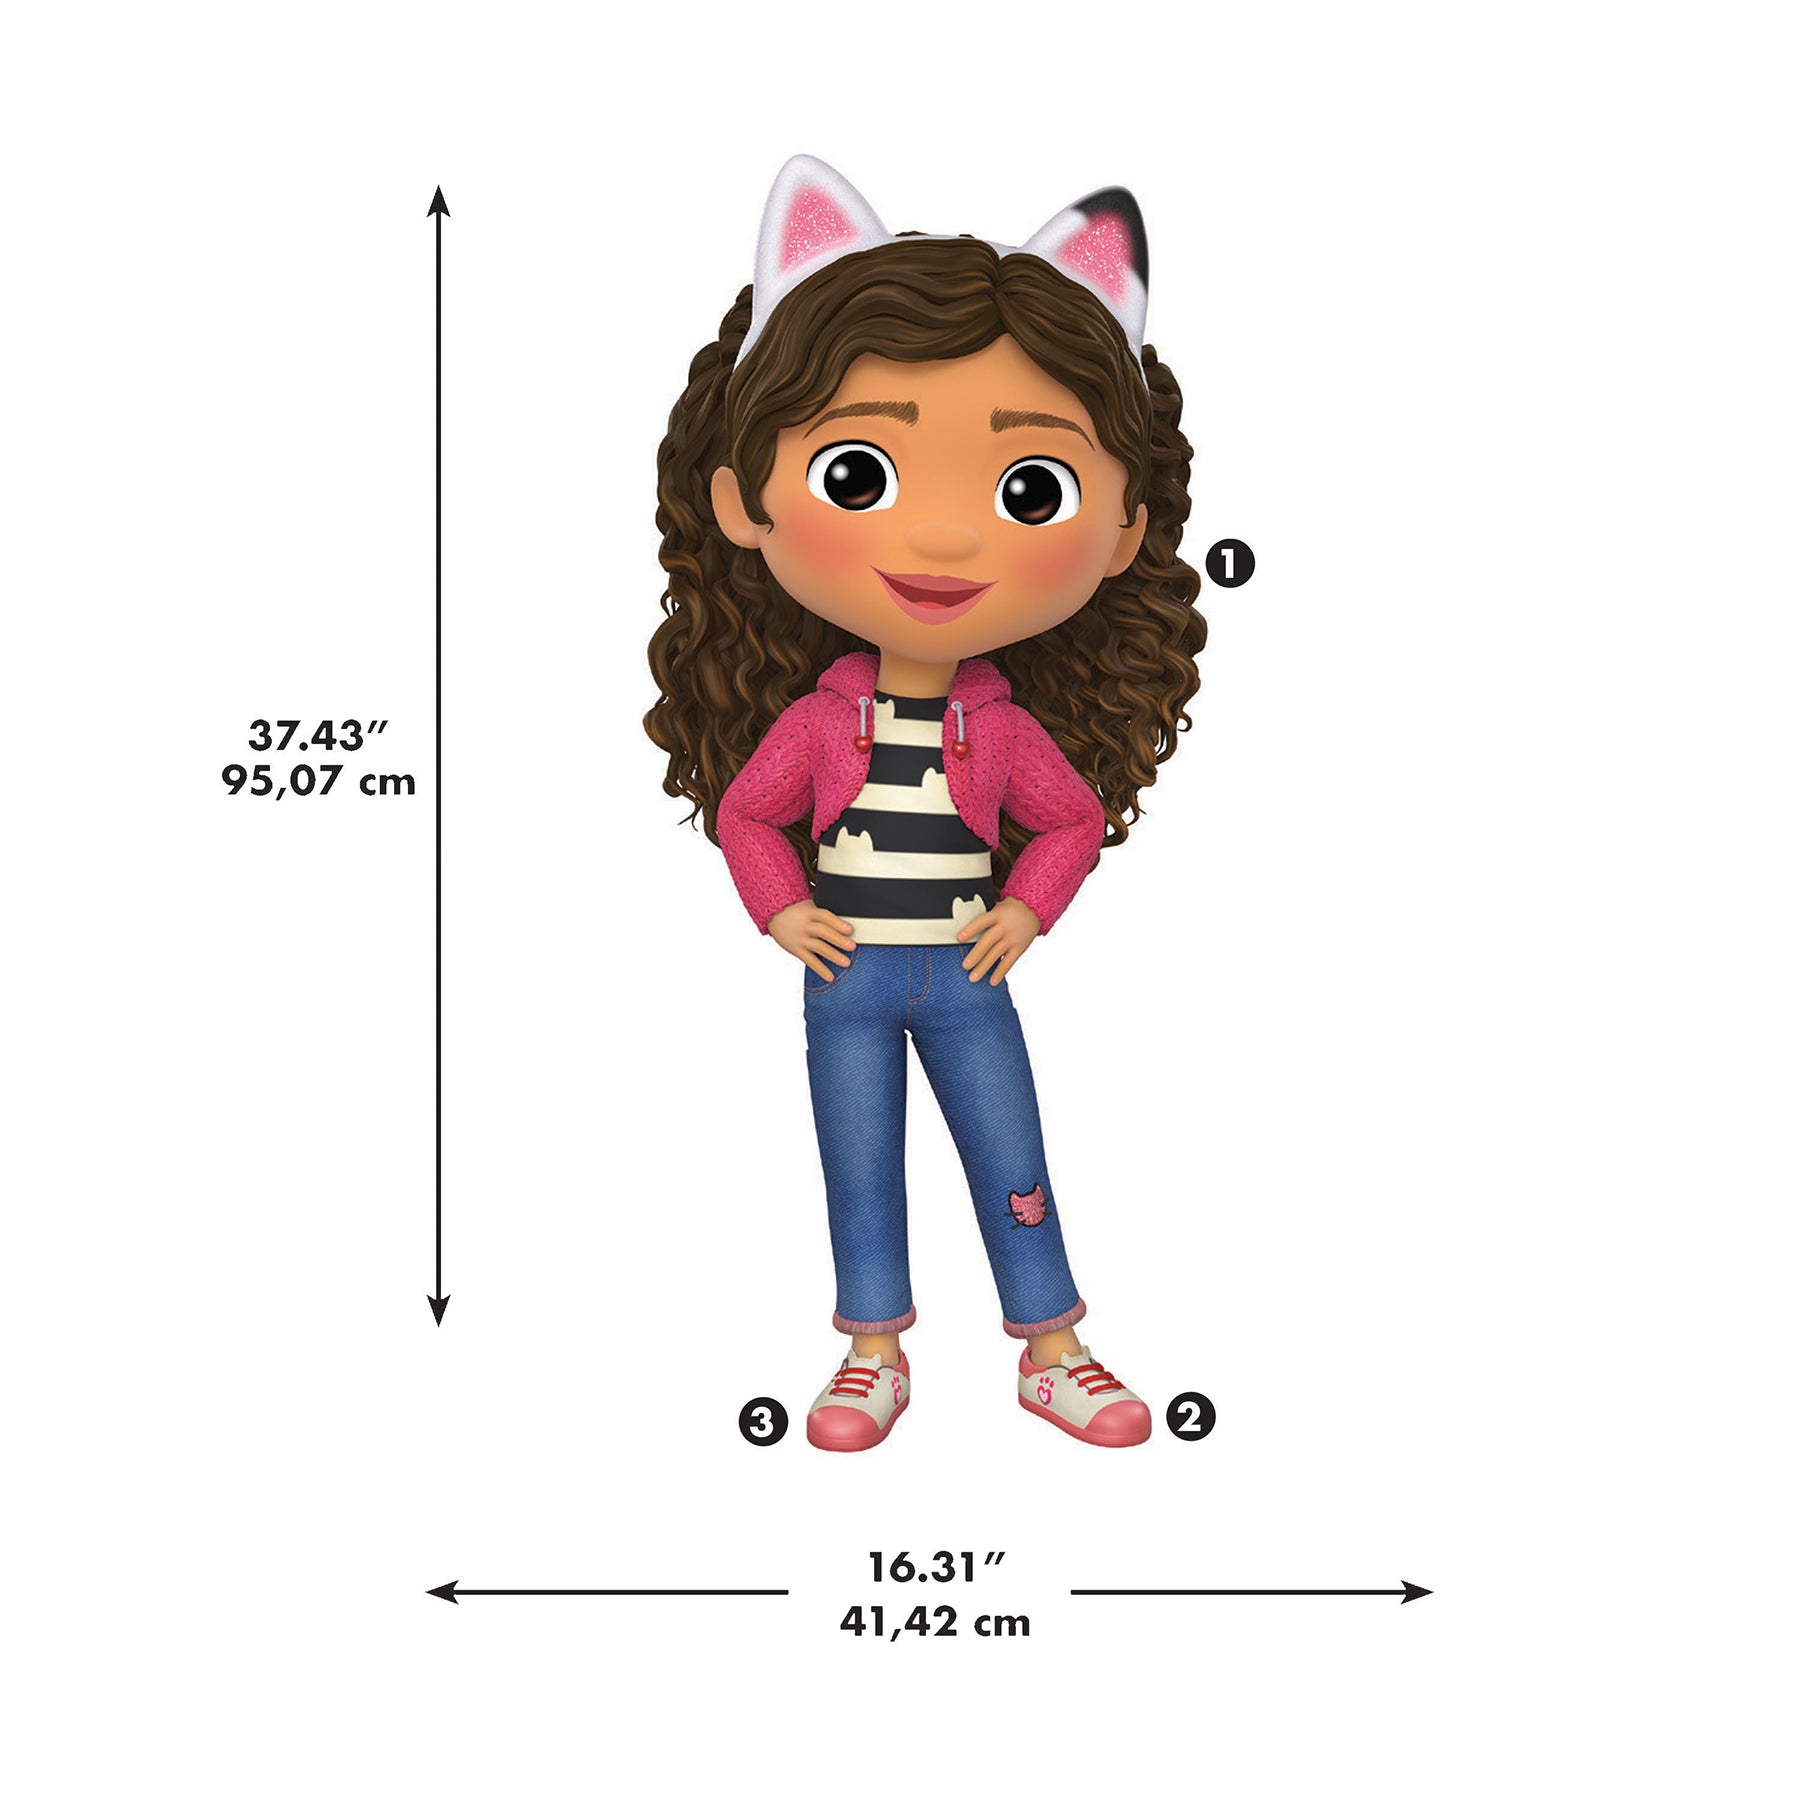 Gabby's Dollhouse Character Giant Wall Decals Wall Decals RoomMates   